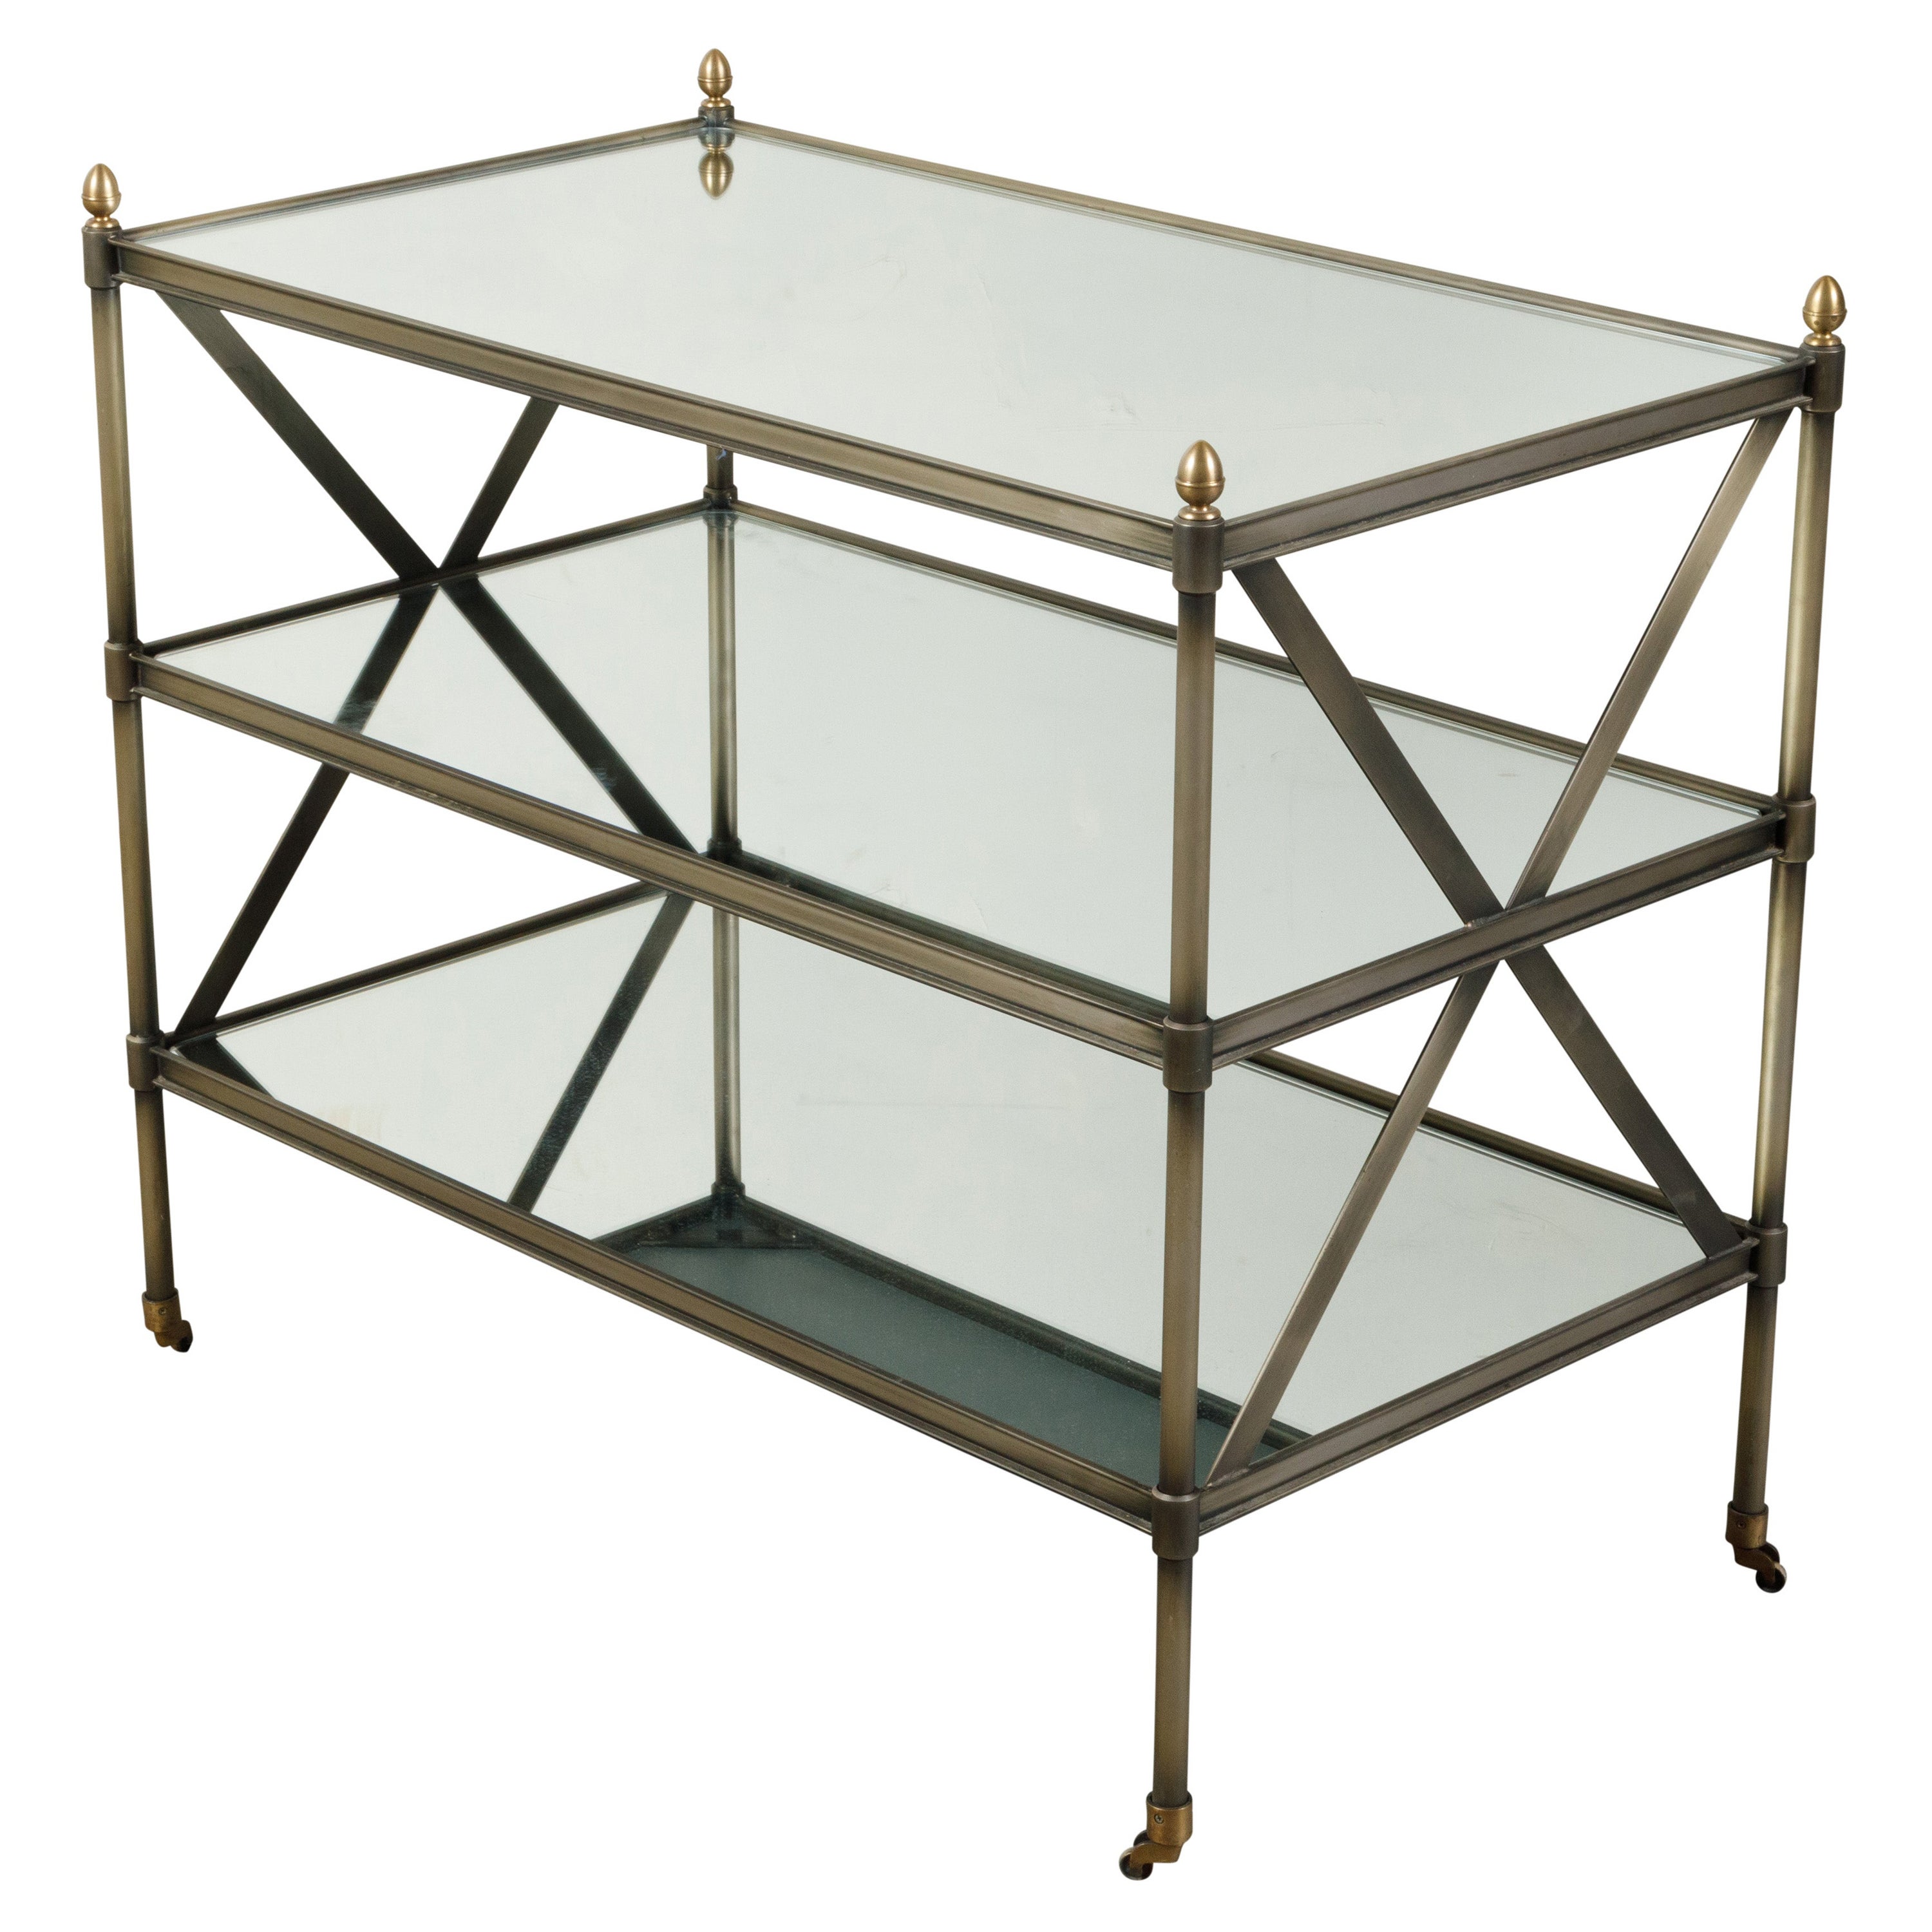 Italian Midcentury Patinated Metal Trolley with Mirrored Shelves and Casters